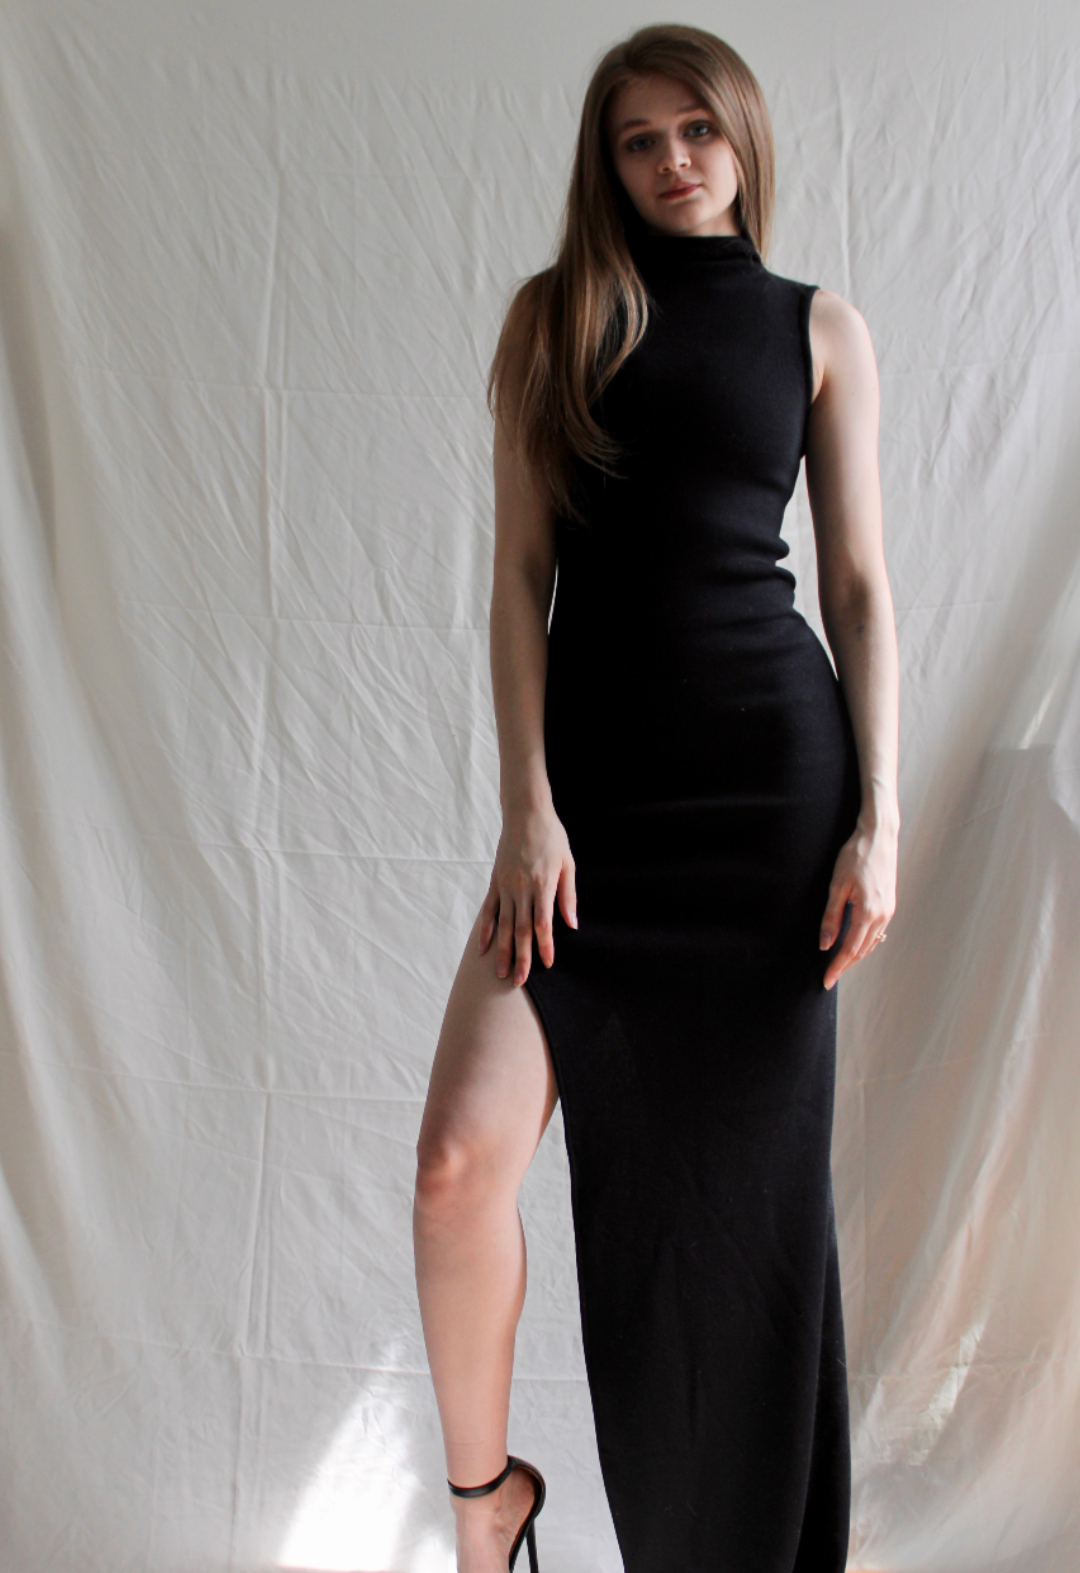 Front view of a model wearing a black knit dress with high leg slit. The background is white.